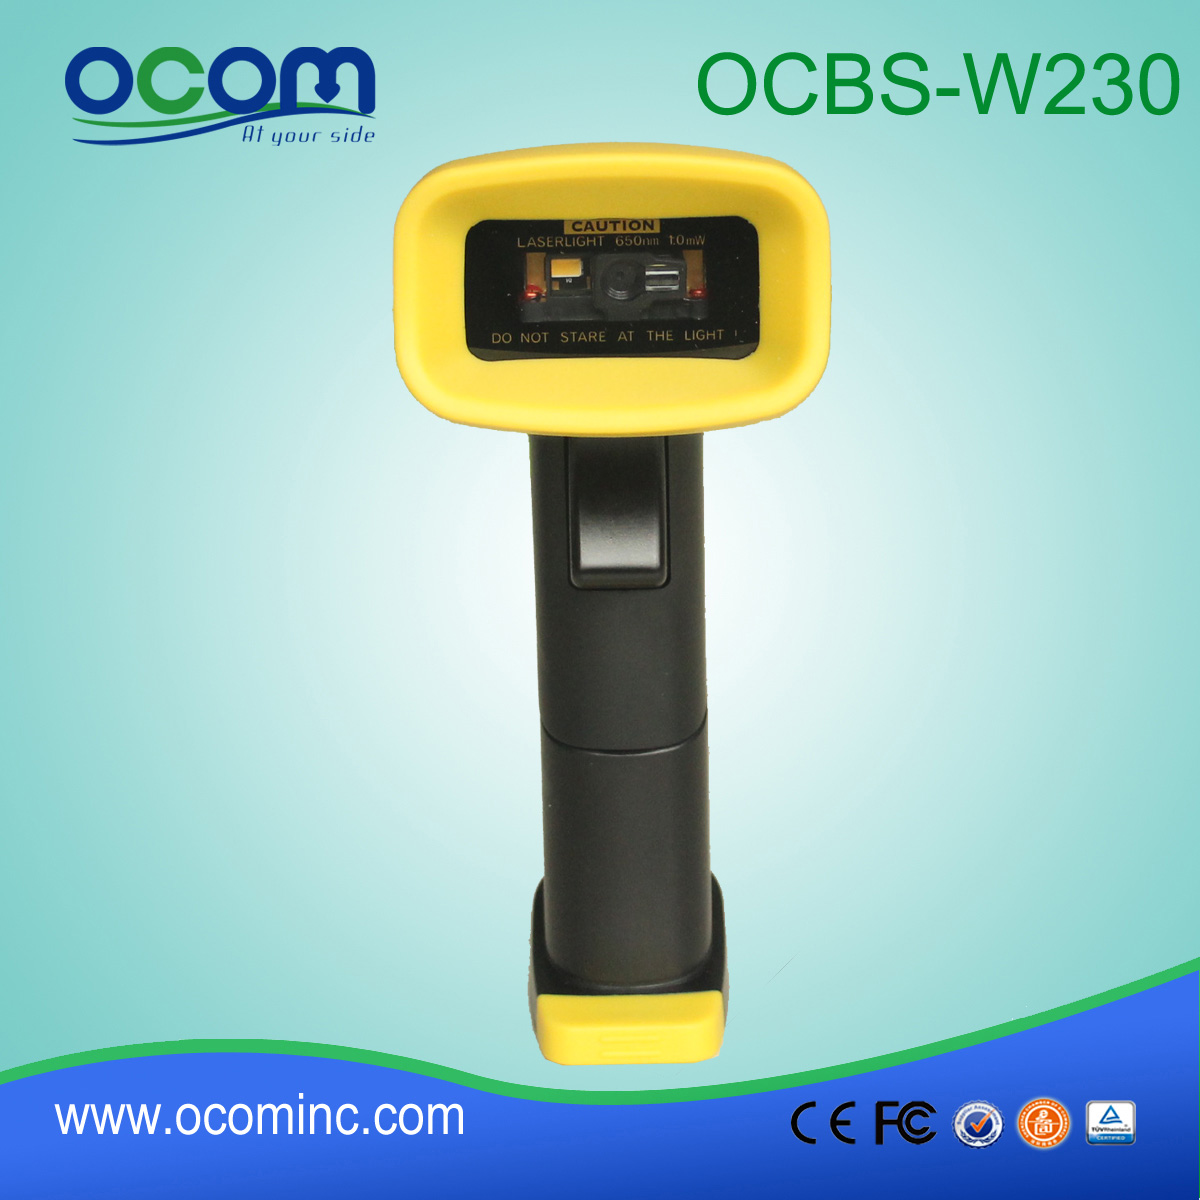 Profesional bluetooth barcode scanner Android, μίνι αναγνώστη barcode